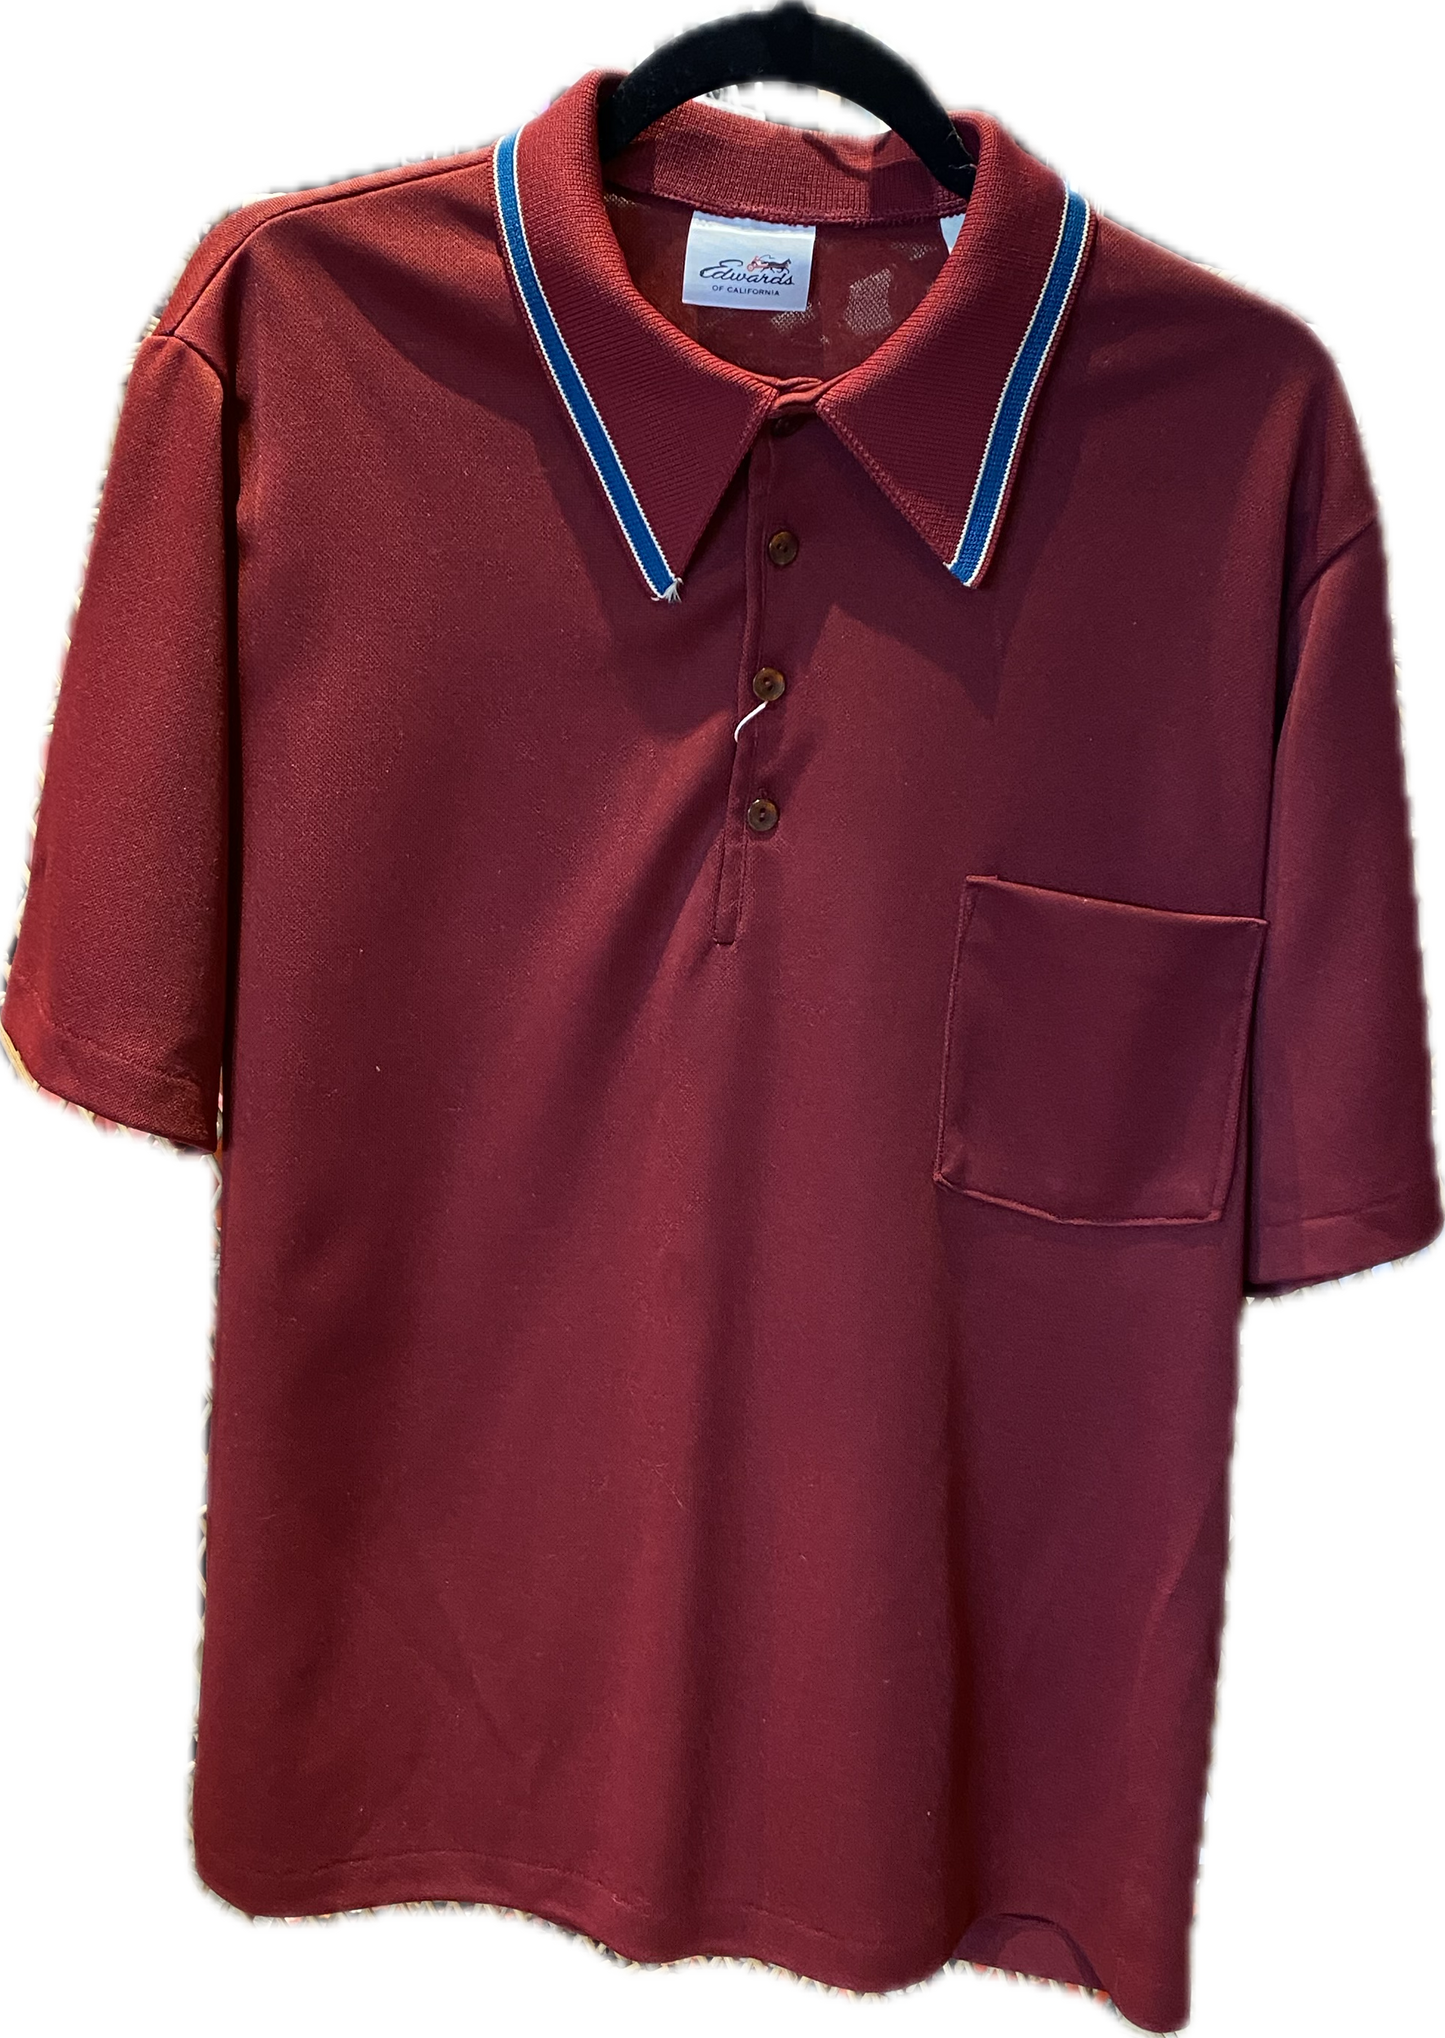 Vintage 70s Men's Burgundy Polyester Polo by. Edwards of California